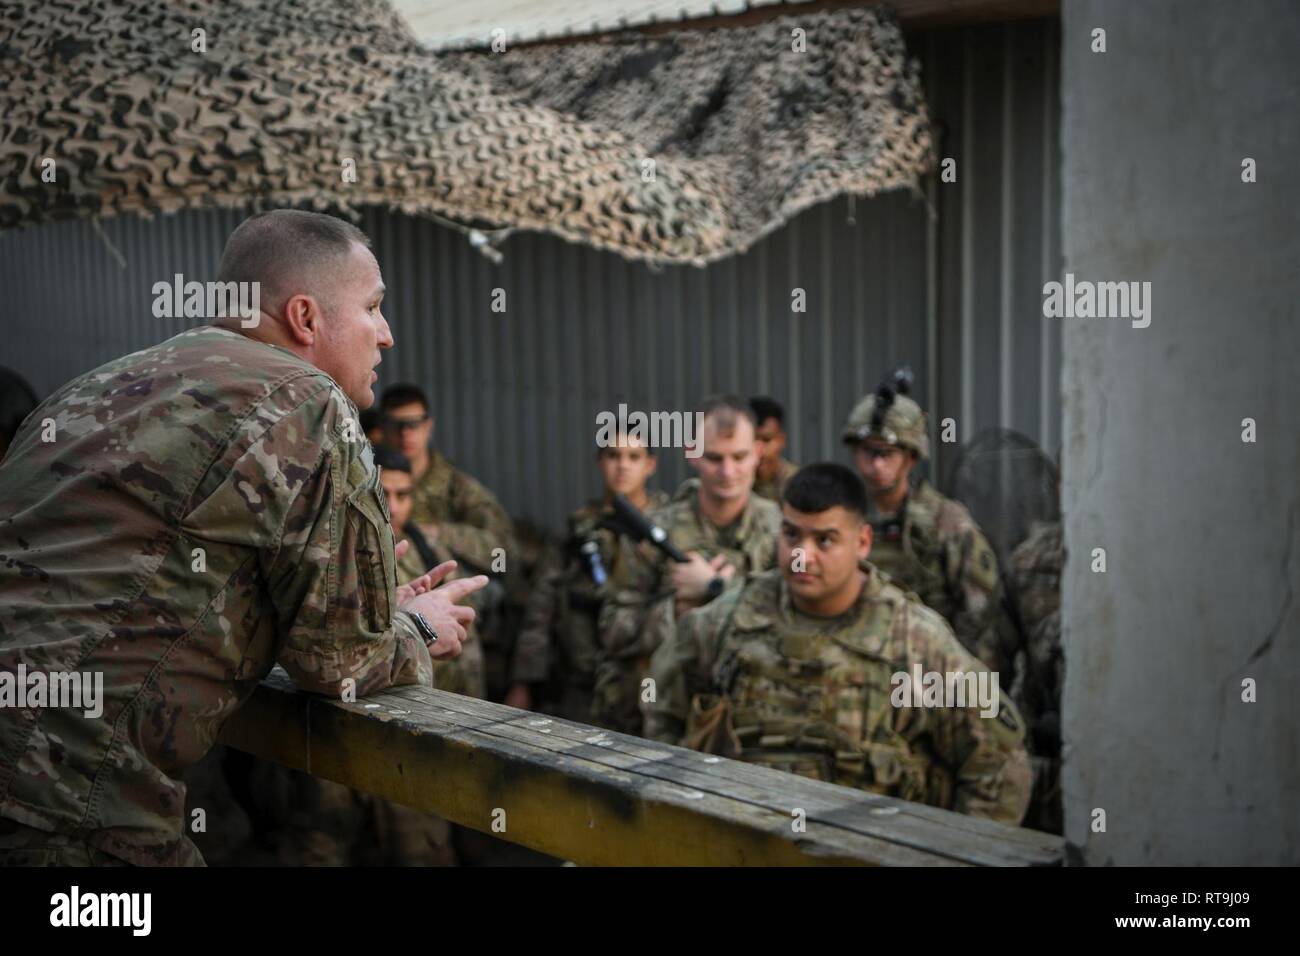 U.S. Army Capt. Raymond Bayane, commanding officer of Delta Company, 1st Battalion, 141st Infantry Regiment (1-141 IN), Texas Army National Guard, deployed in support of Combined Joint Task Force - Horn of Africa (CJTF-HOA), briefs his Soldiers in the reaction force compound on Camp Lemonnier, Djibouti, Jan. 29, 2019. The mission of the 1-141 IN is to rapidly deploy in response to any crisis threatening U.S. personnel or property throughout CJTF-HOA, and to contribute to international efforts to enhance security and stability in East Africa by providing security force assistance and fostering  Stock Photo